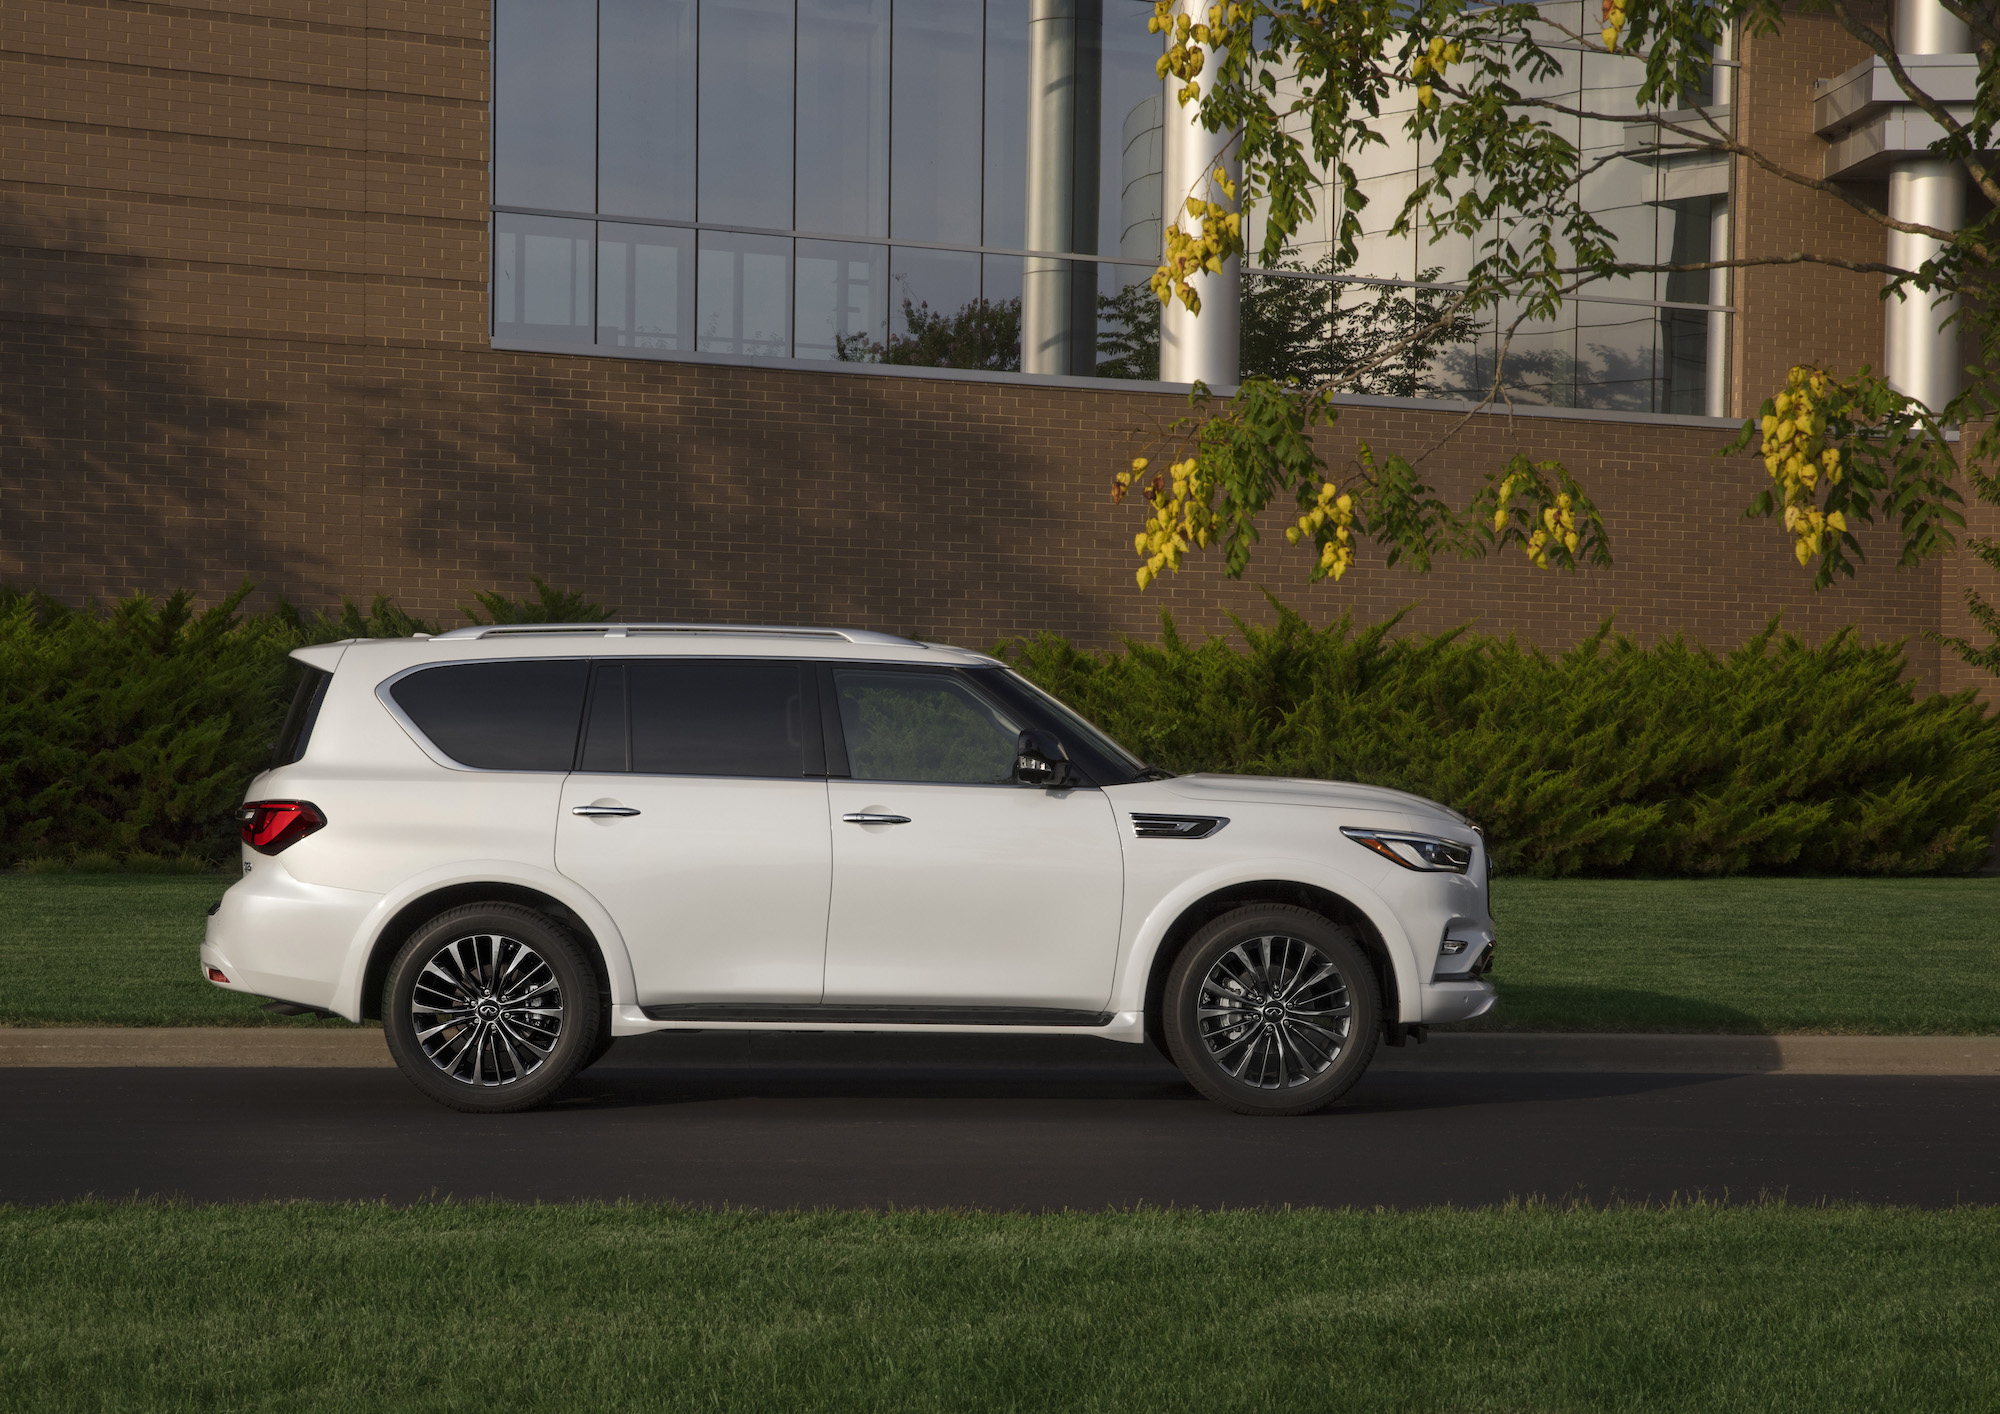 A white 2021 Infiniti QX80 three-row SUV parked along a curb next to grass and trees outside a modern office building